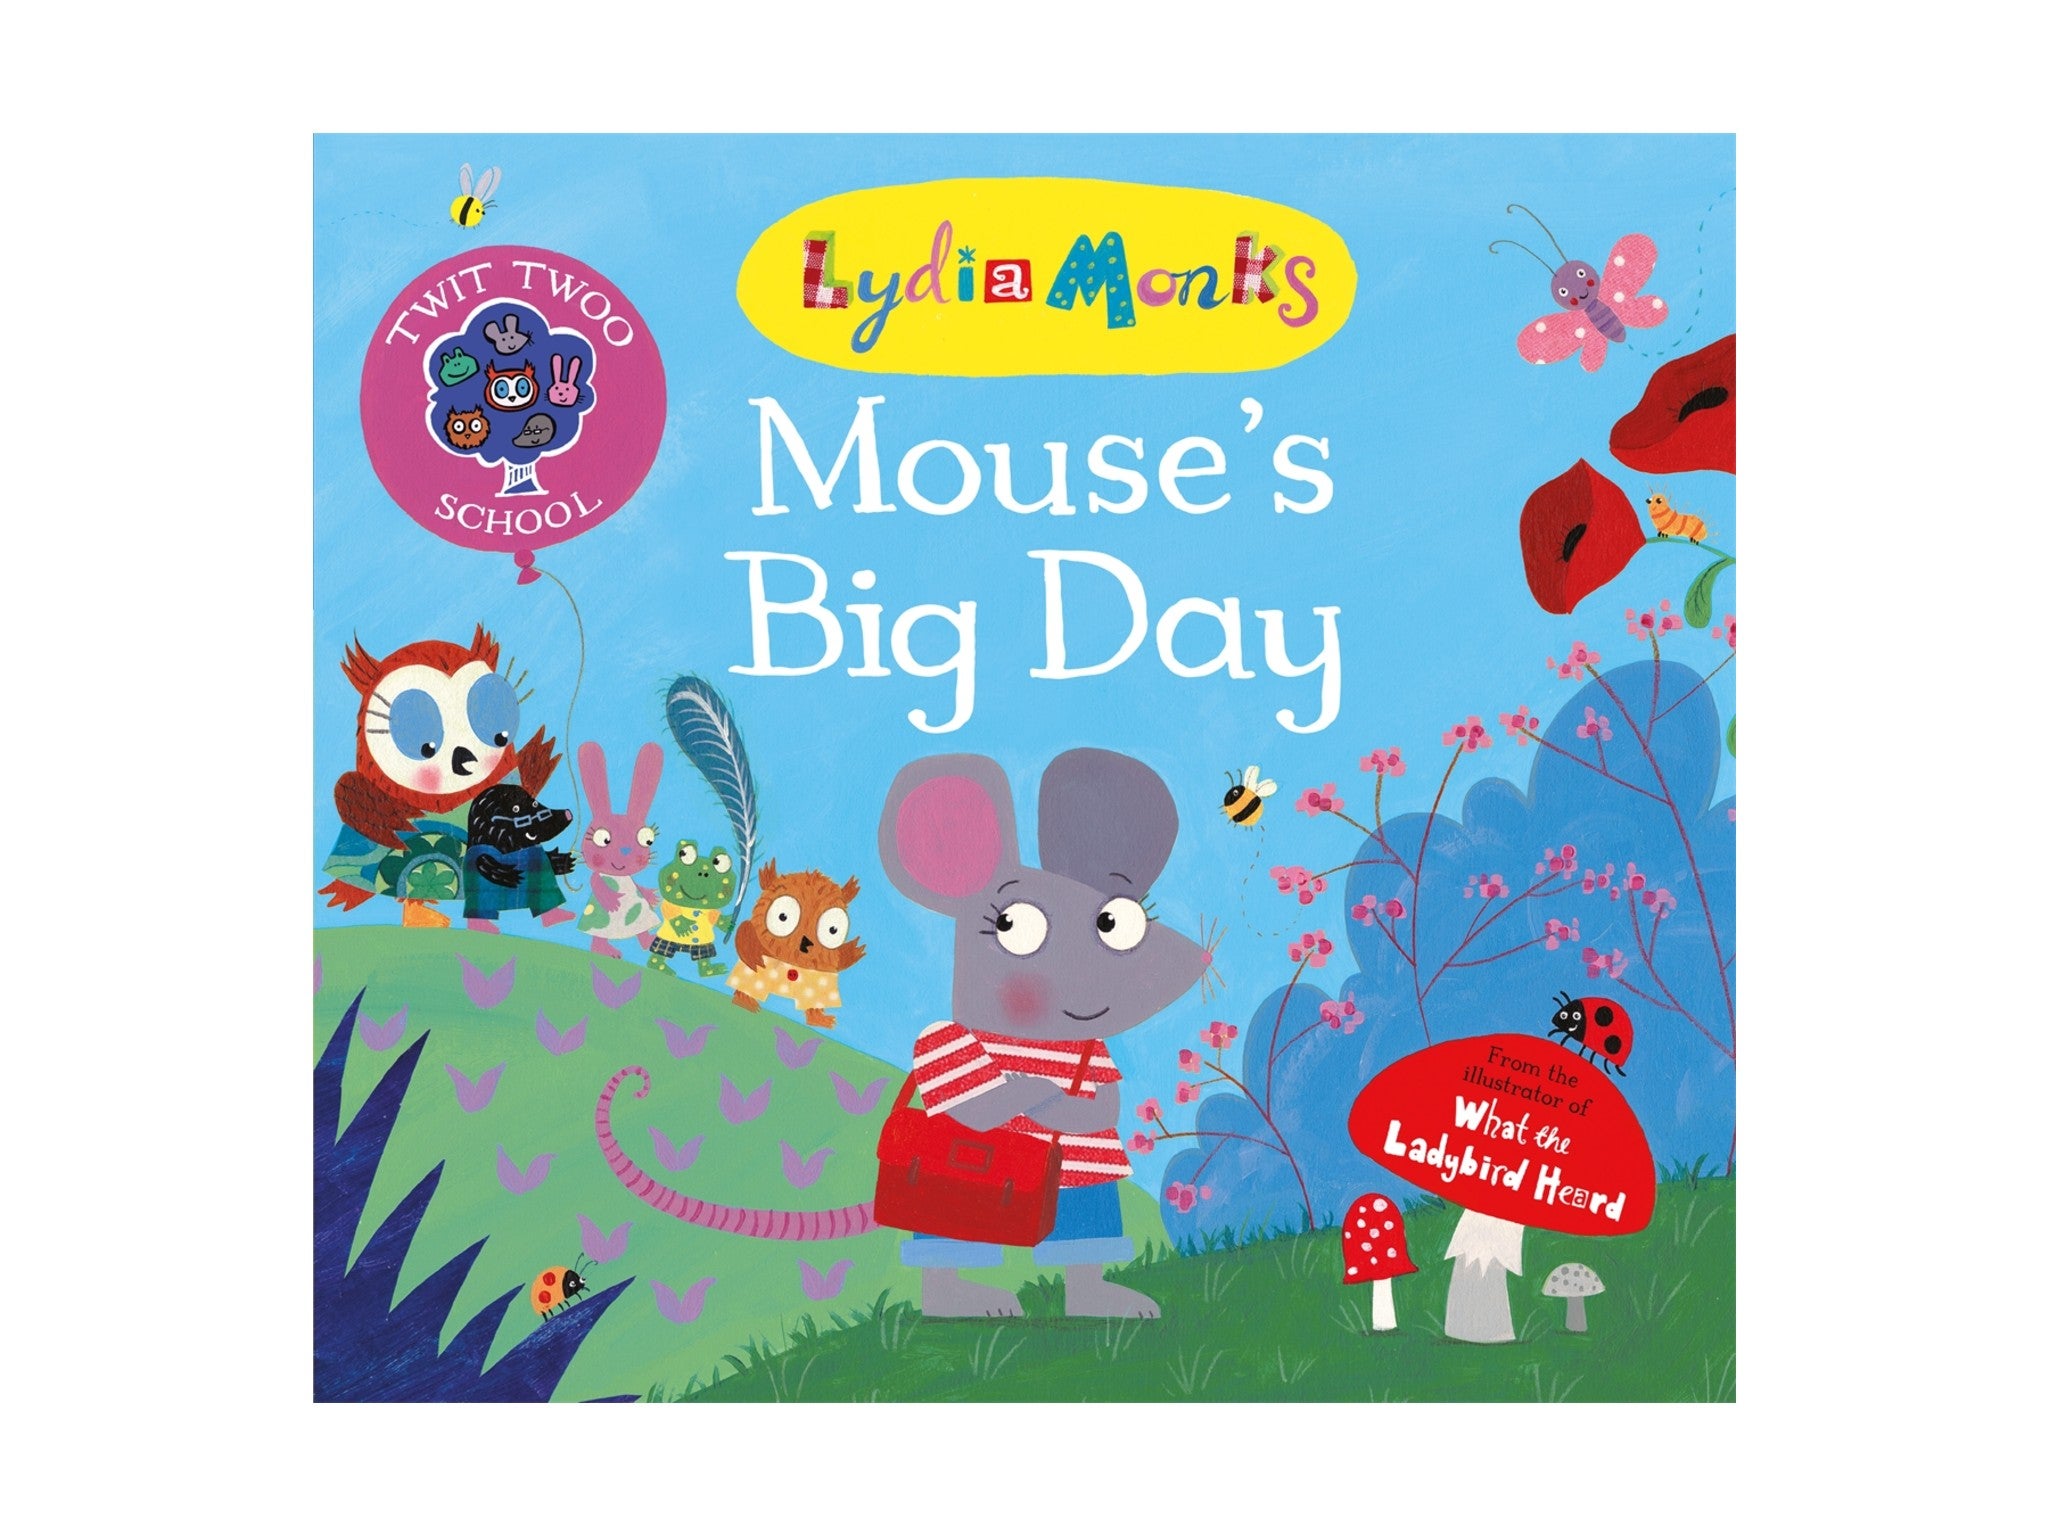 Mouse’s Big Day by Lydia Monks, published by Macmillan indybest.jpeg